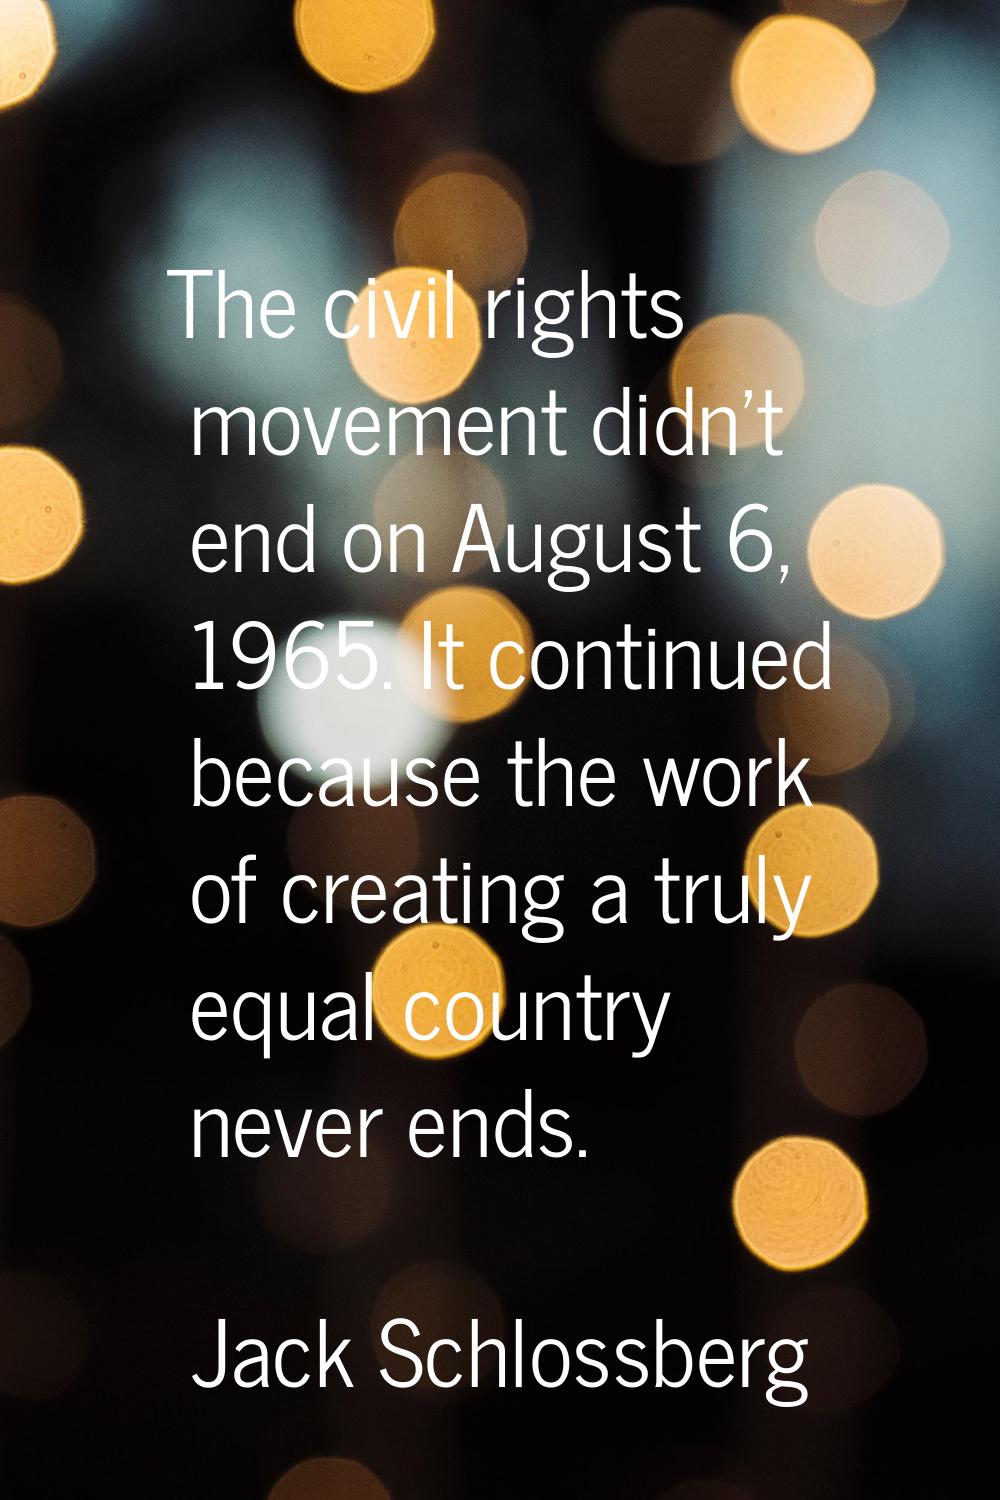 The civil rights movement didn't end on August 6, 1965. It continued because the work of creating a